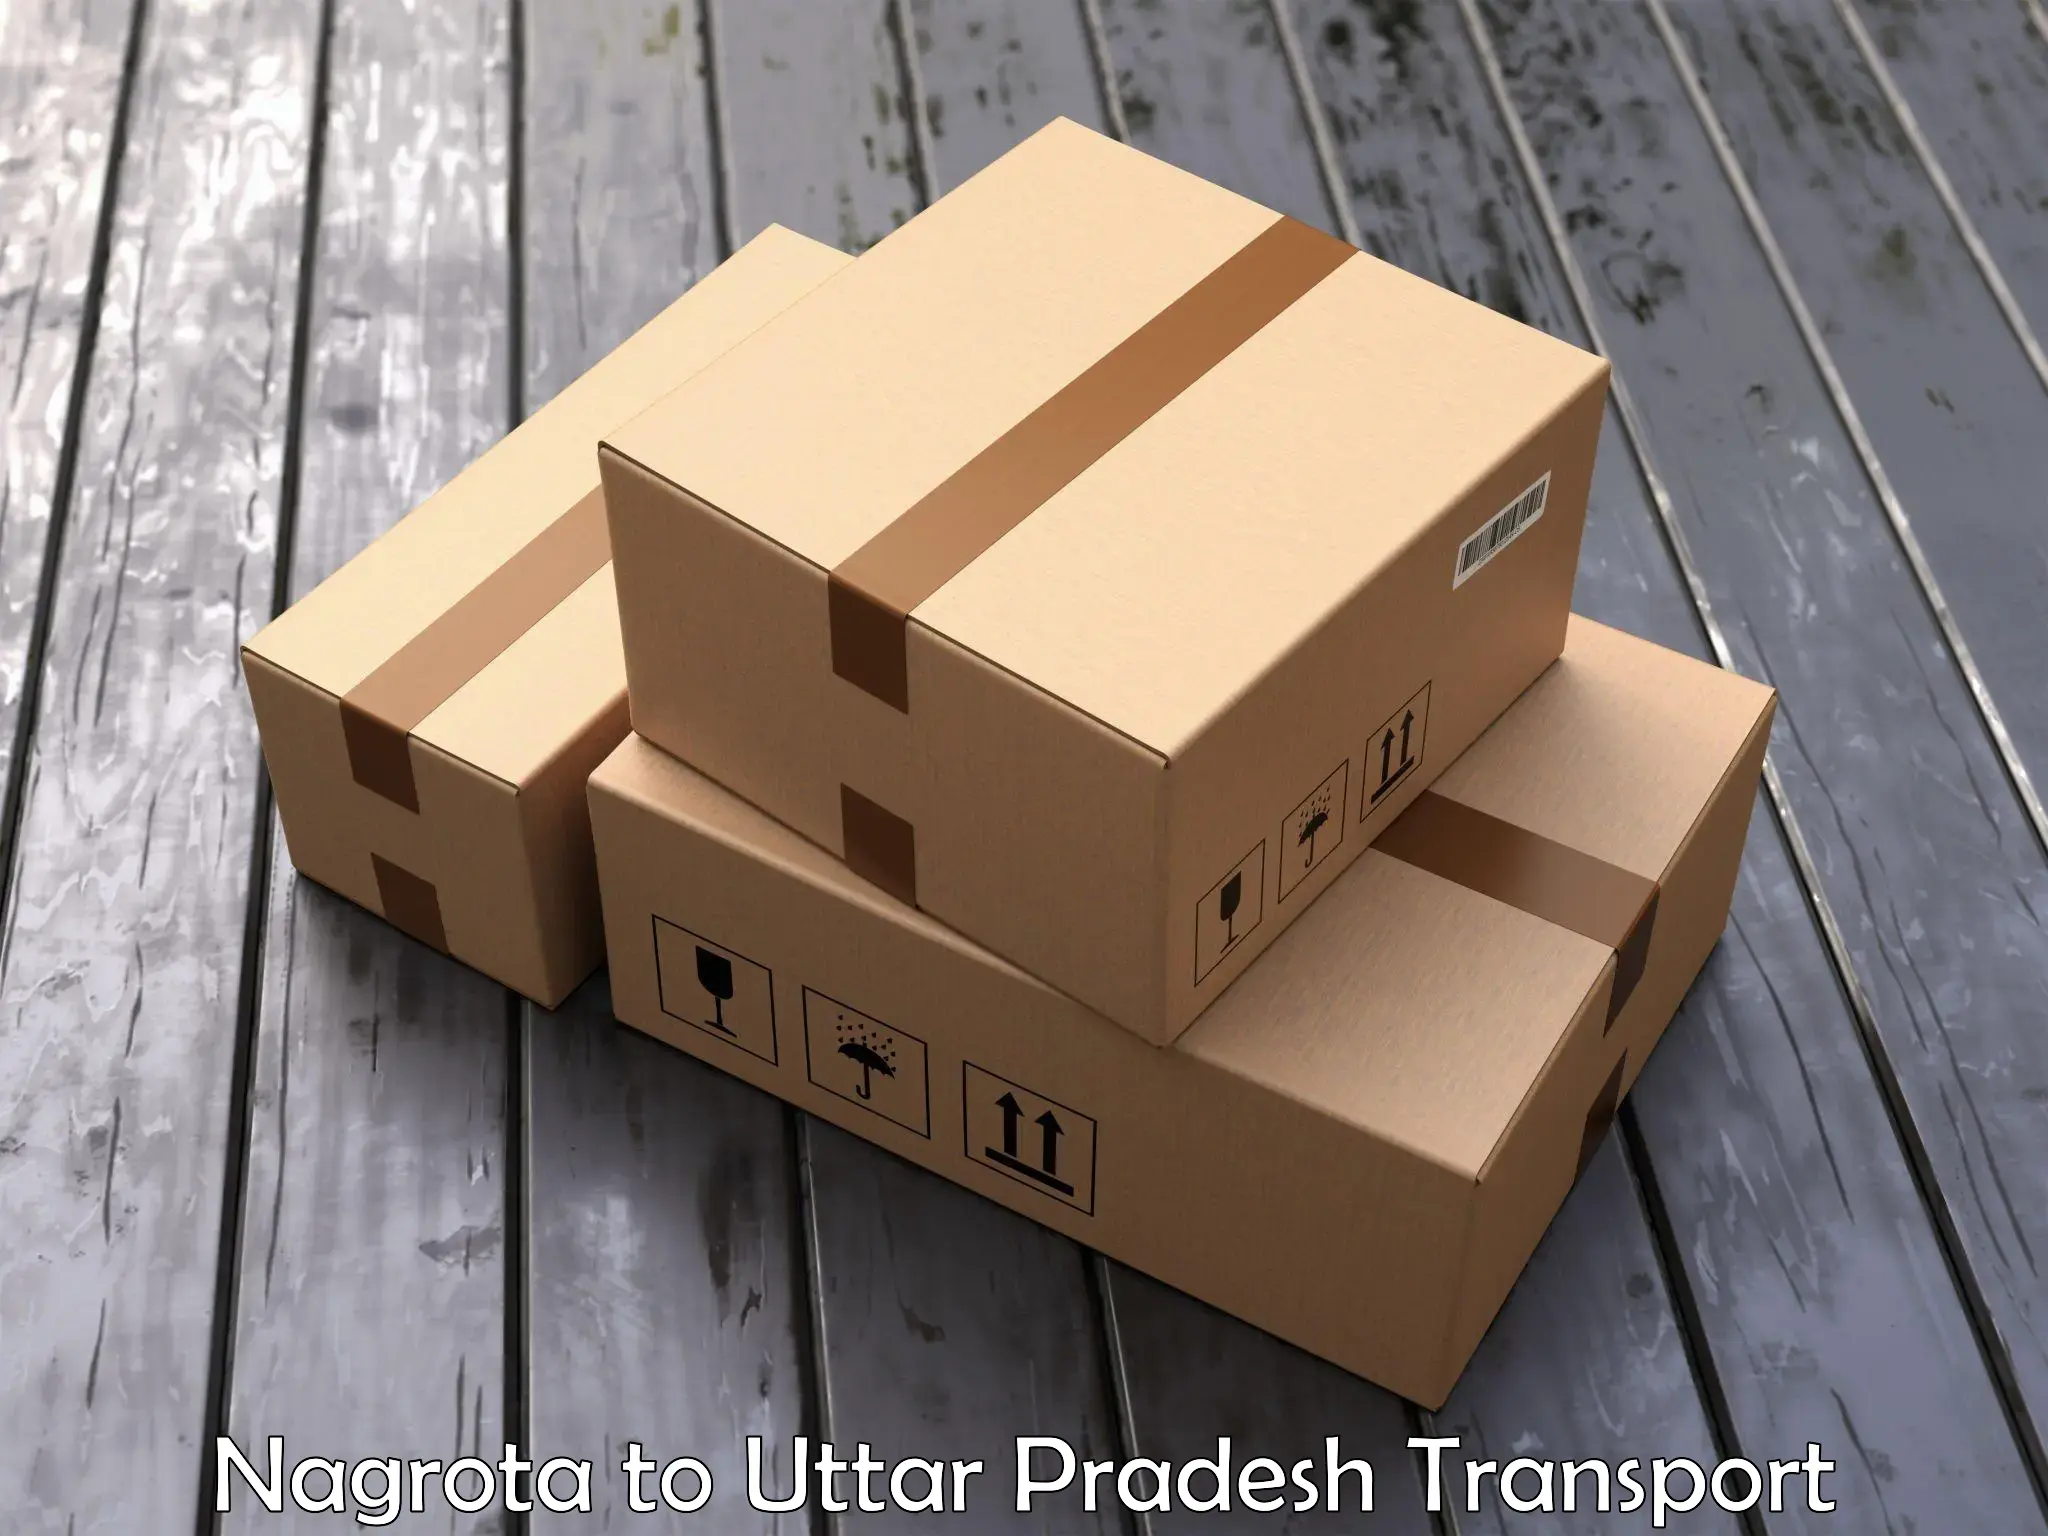 Truck transport companies in India in Nagrota to Fatehpur